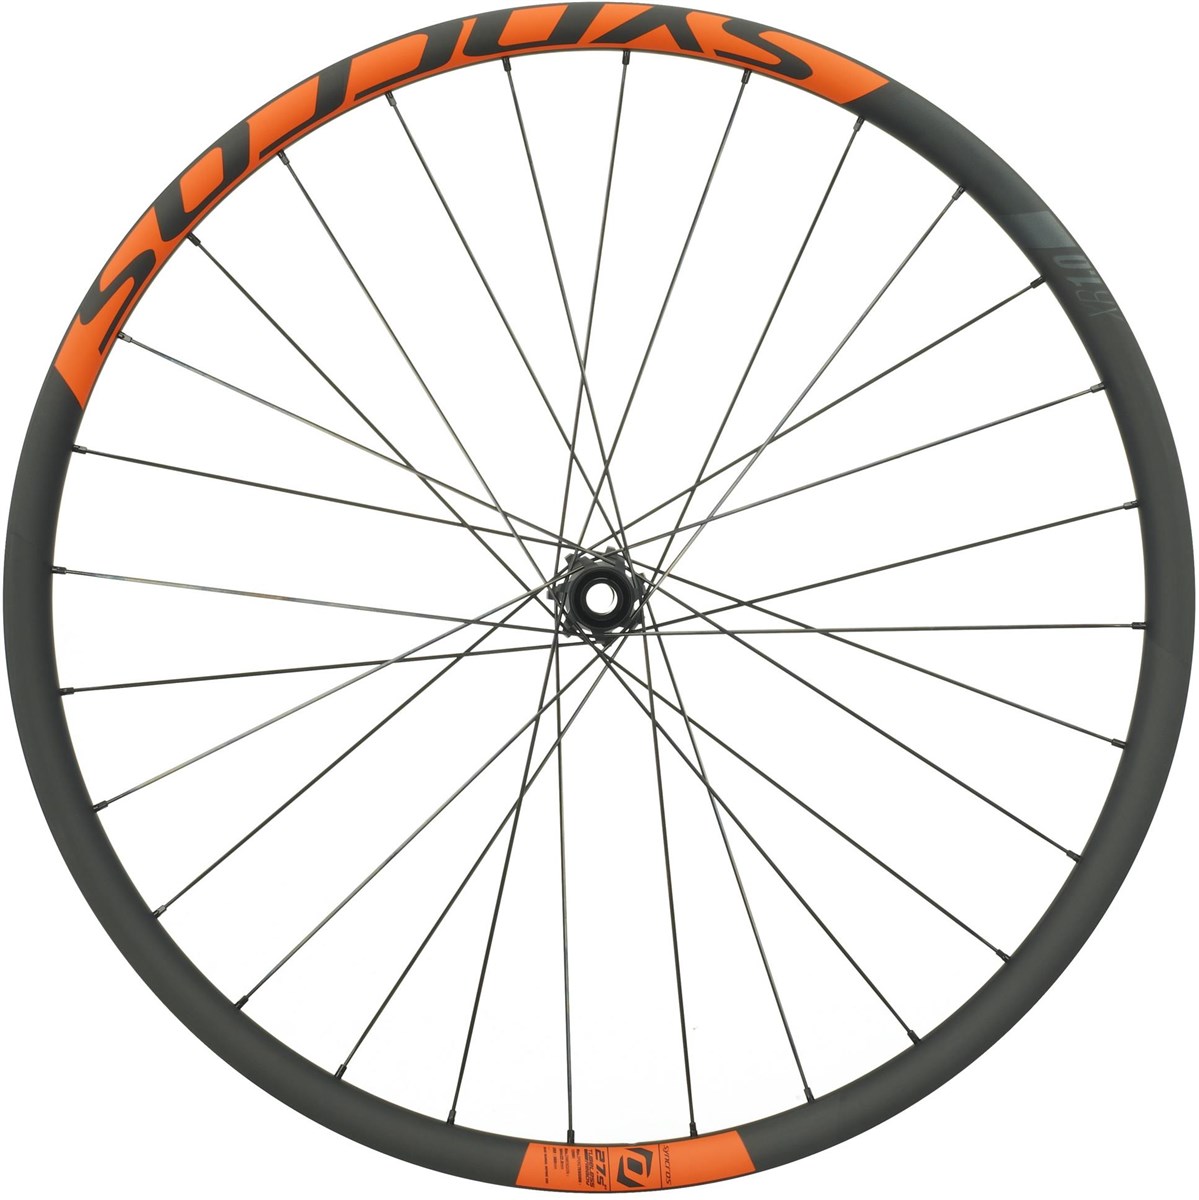 Syncros XR1.0 650b Carbon Wheel product image